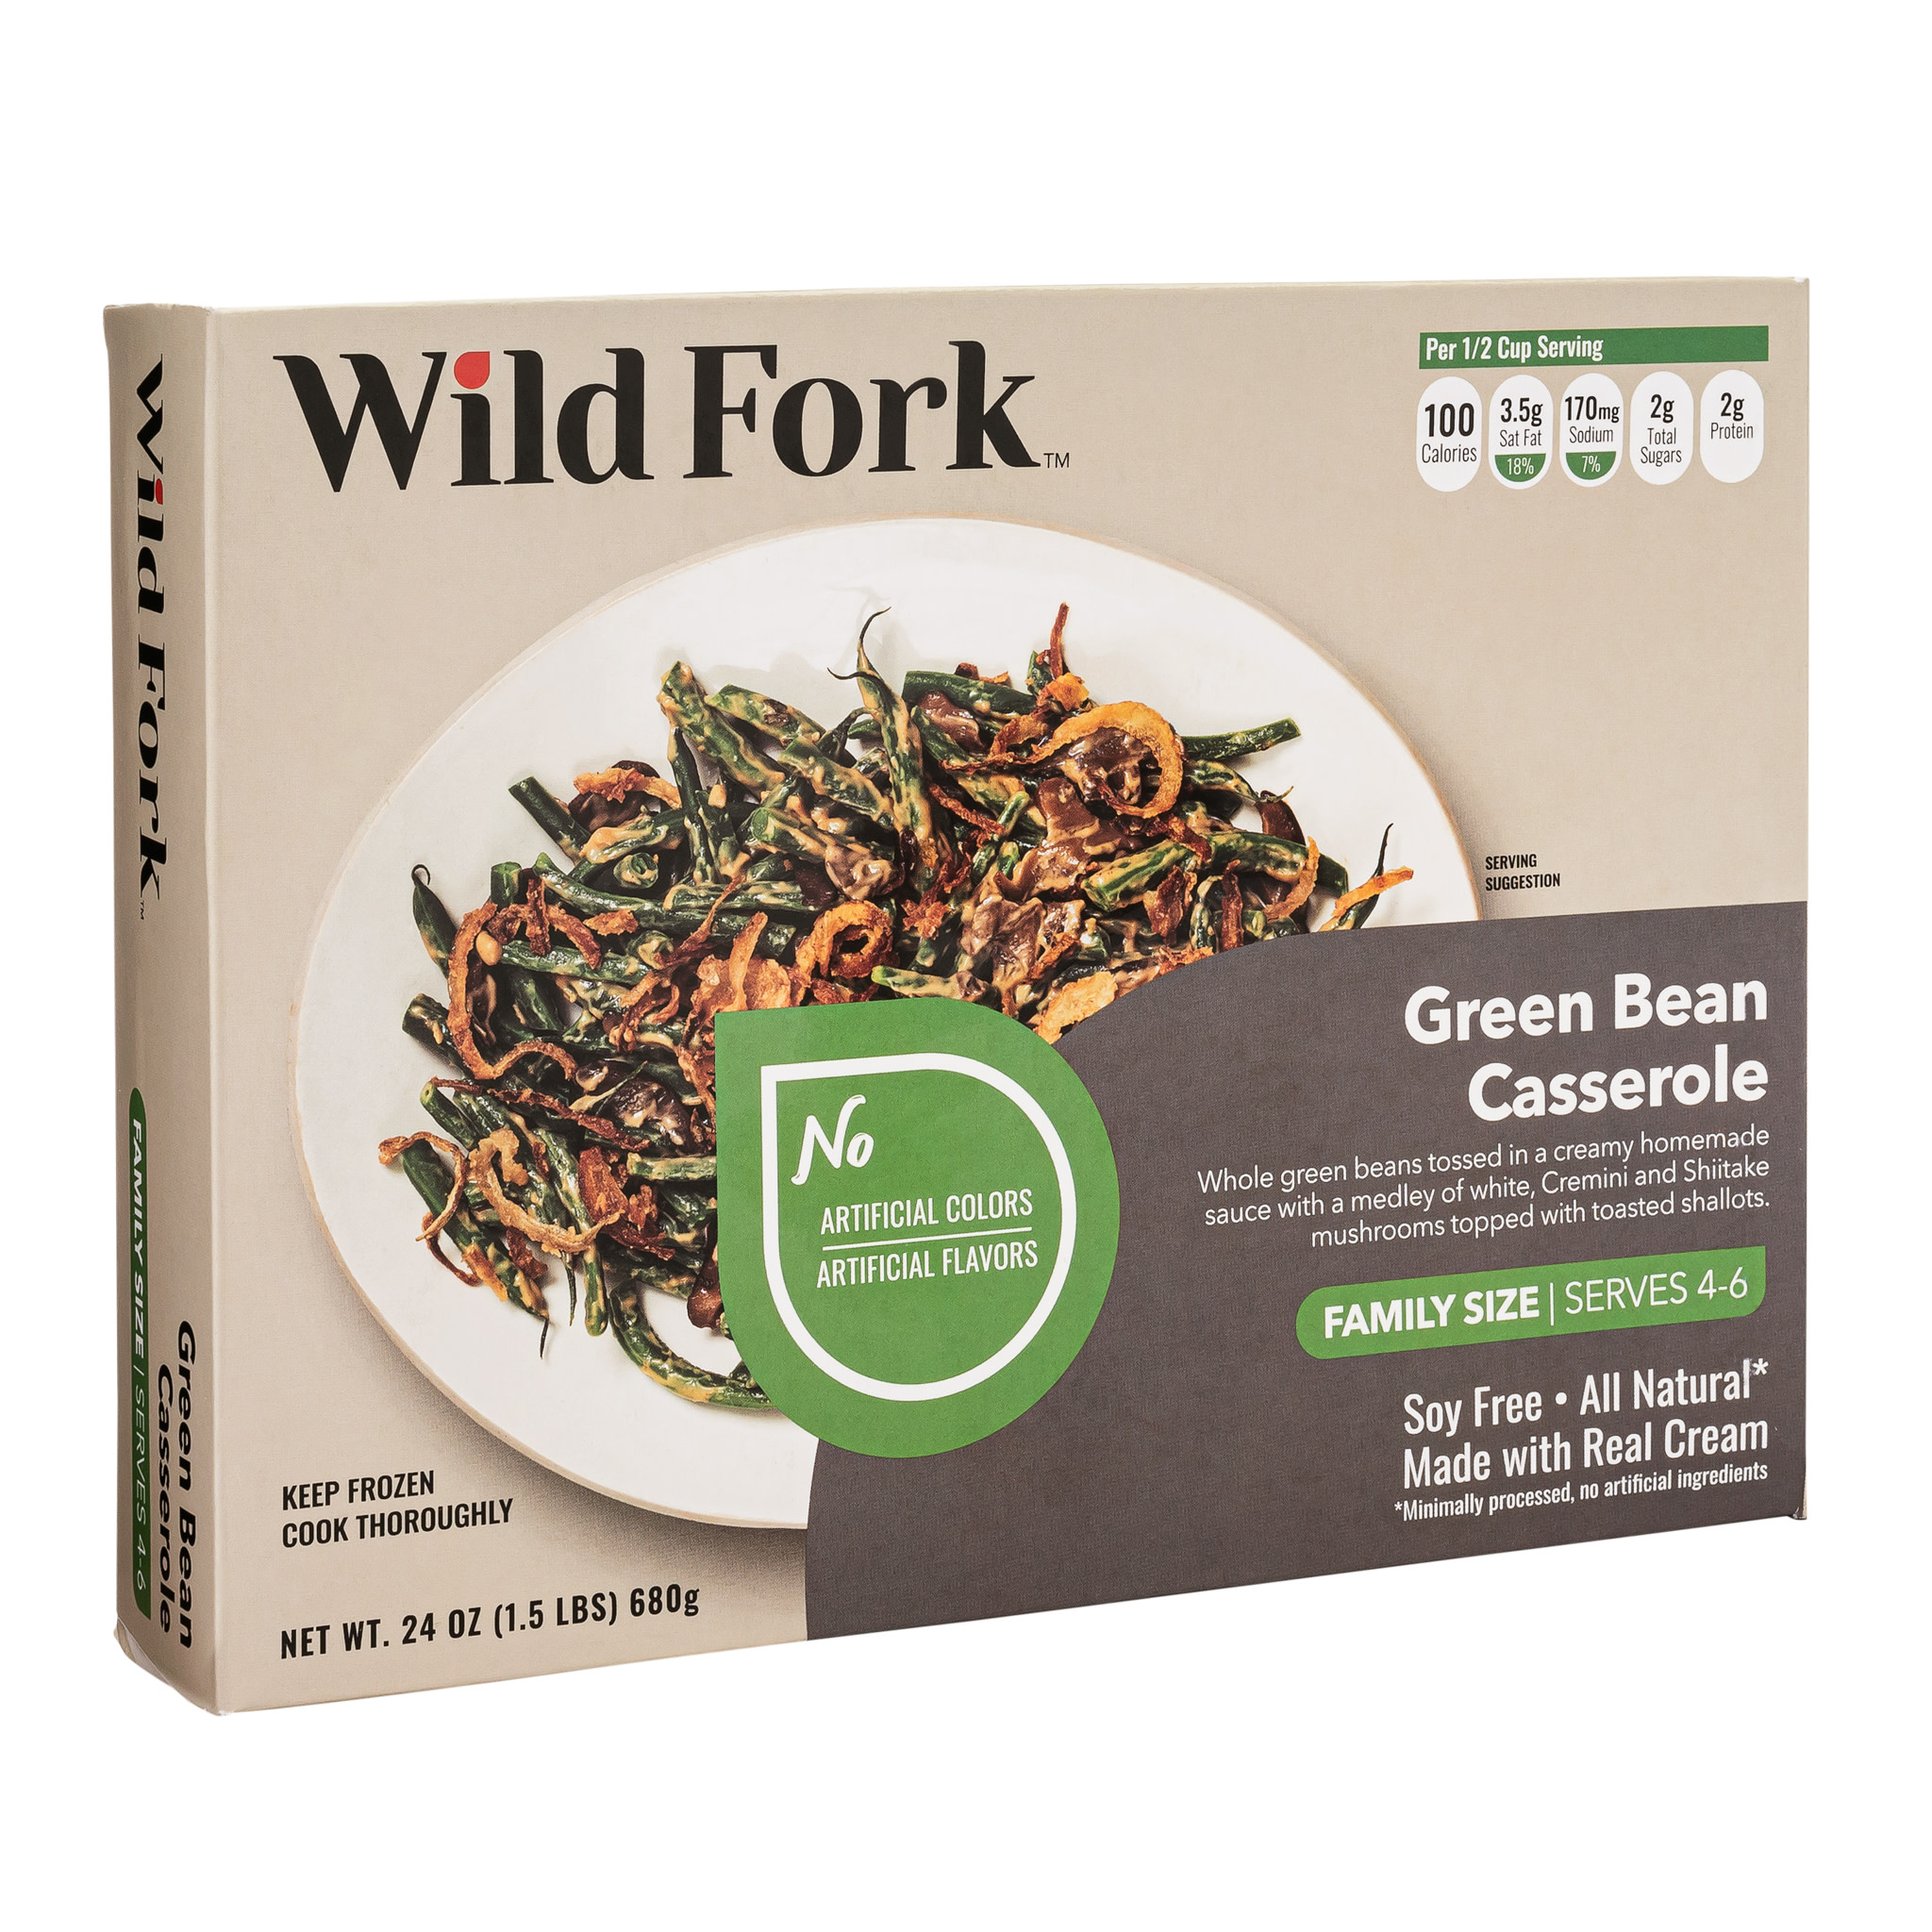 8055 WF PACKAGED Green bean casserole-Family Size Ready Meals